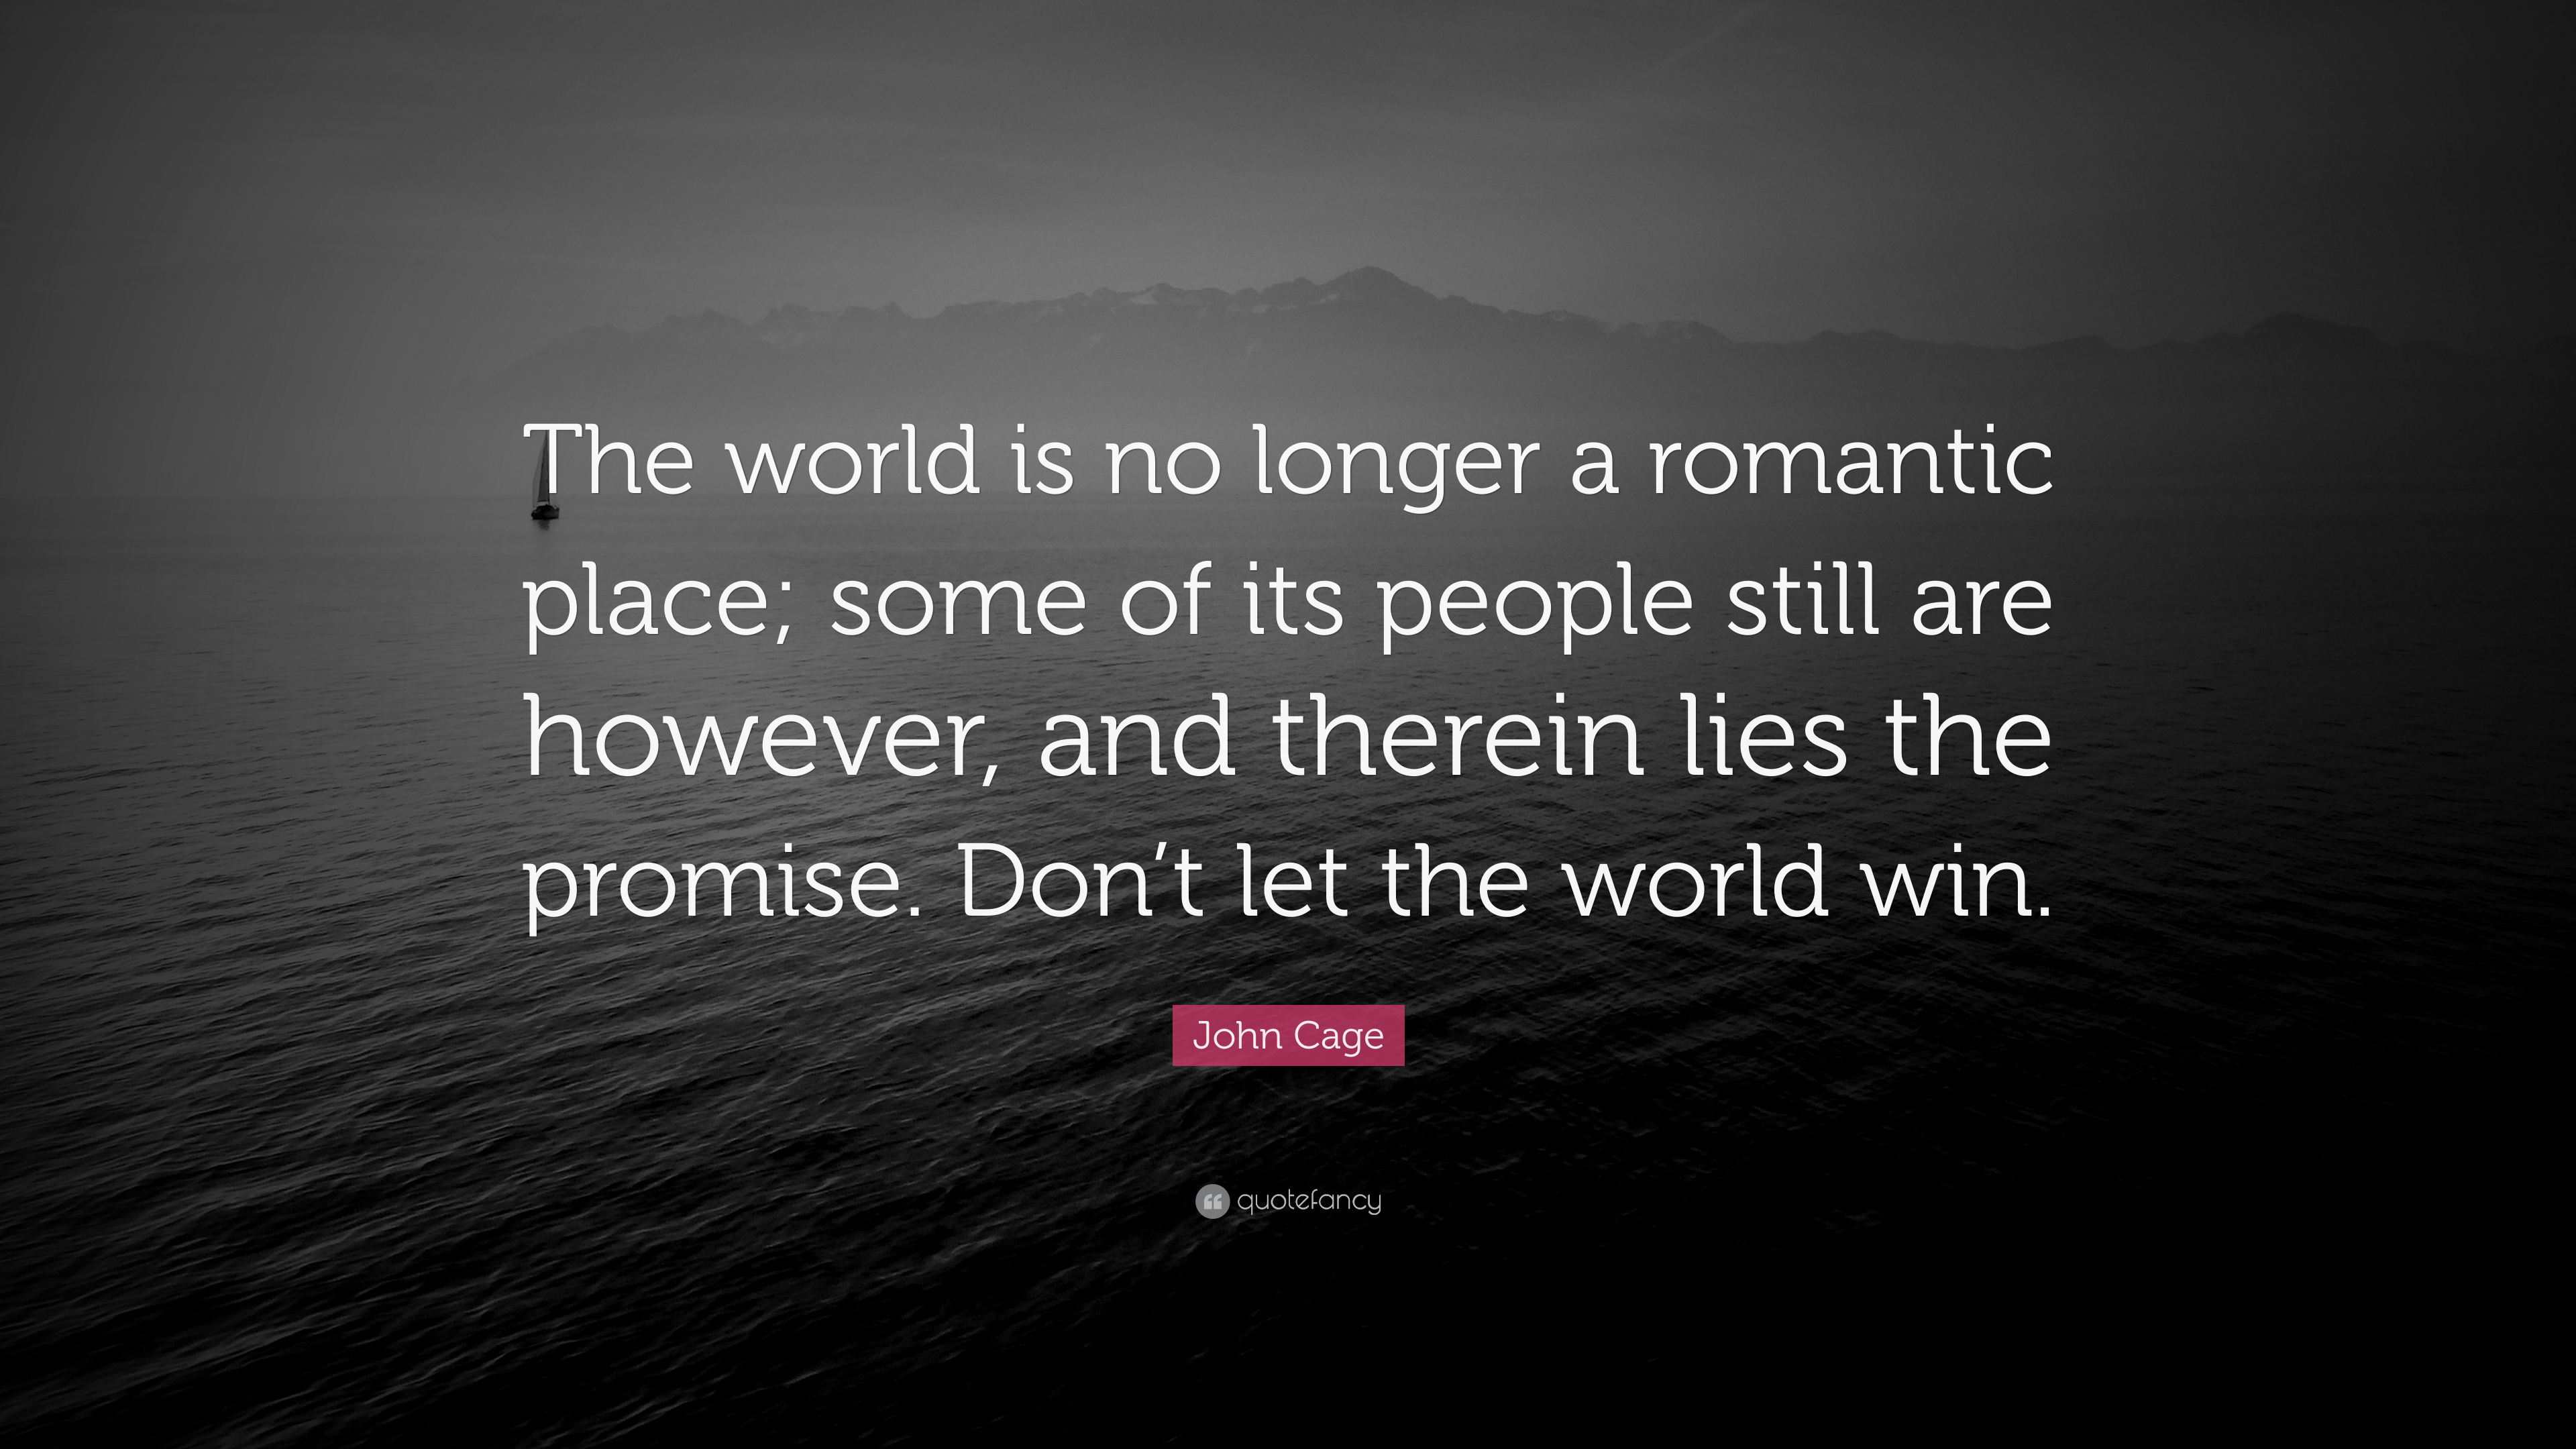 John Cage Quote: "The world is no longer a romantic place 